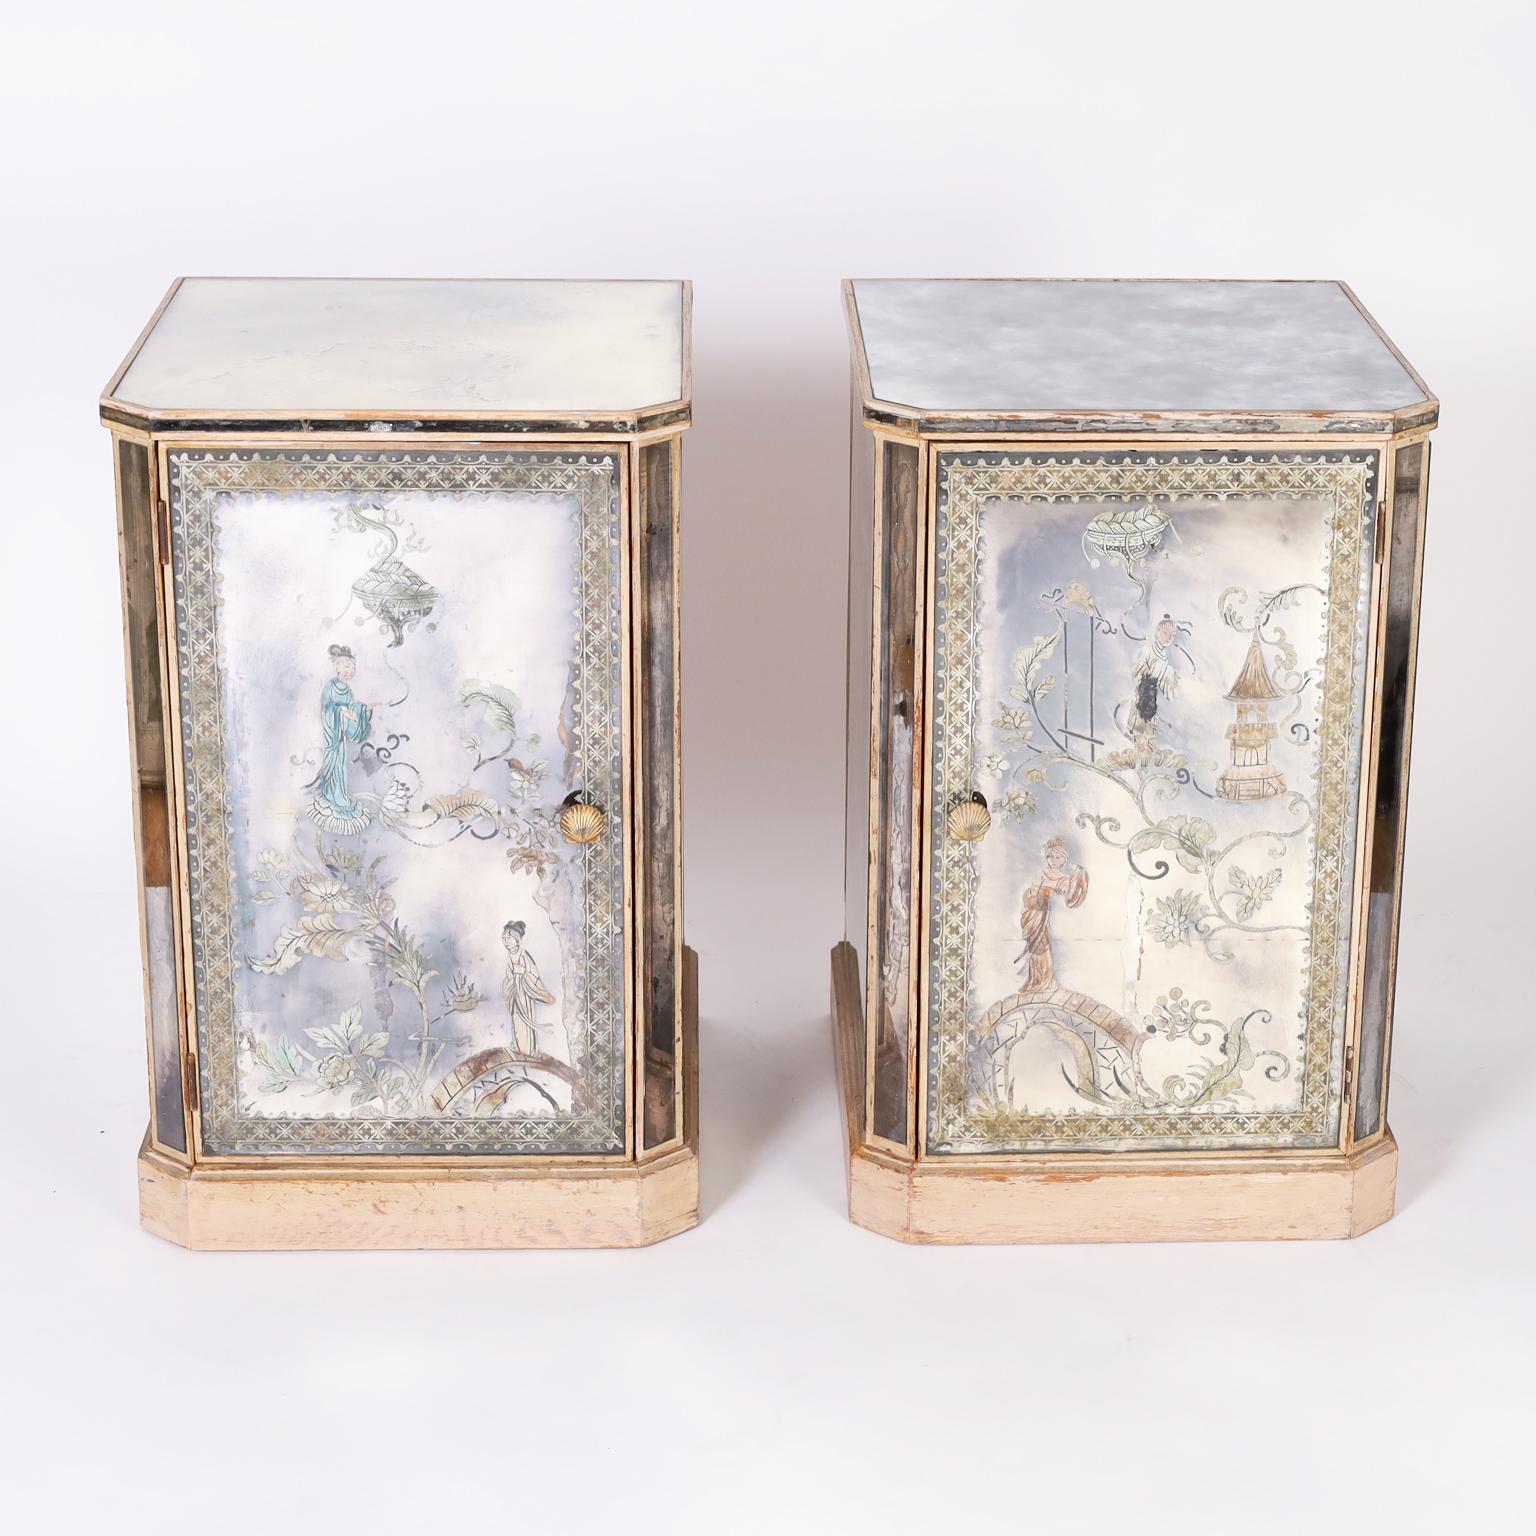 Pair of Italian art deco églomisé nightstands with distressed mirrored panels decorated in a reverse painting technique with chinoiserie designs on the fronts and three sides, one side replaced and two have small cracks. The doors have the original